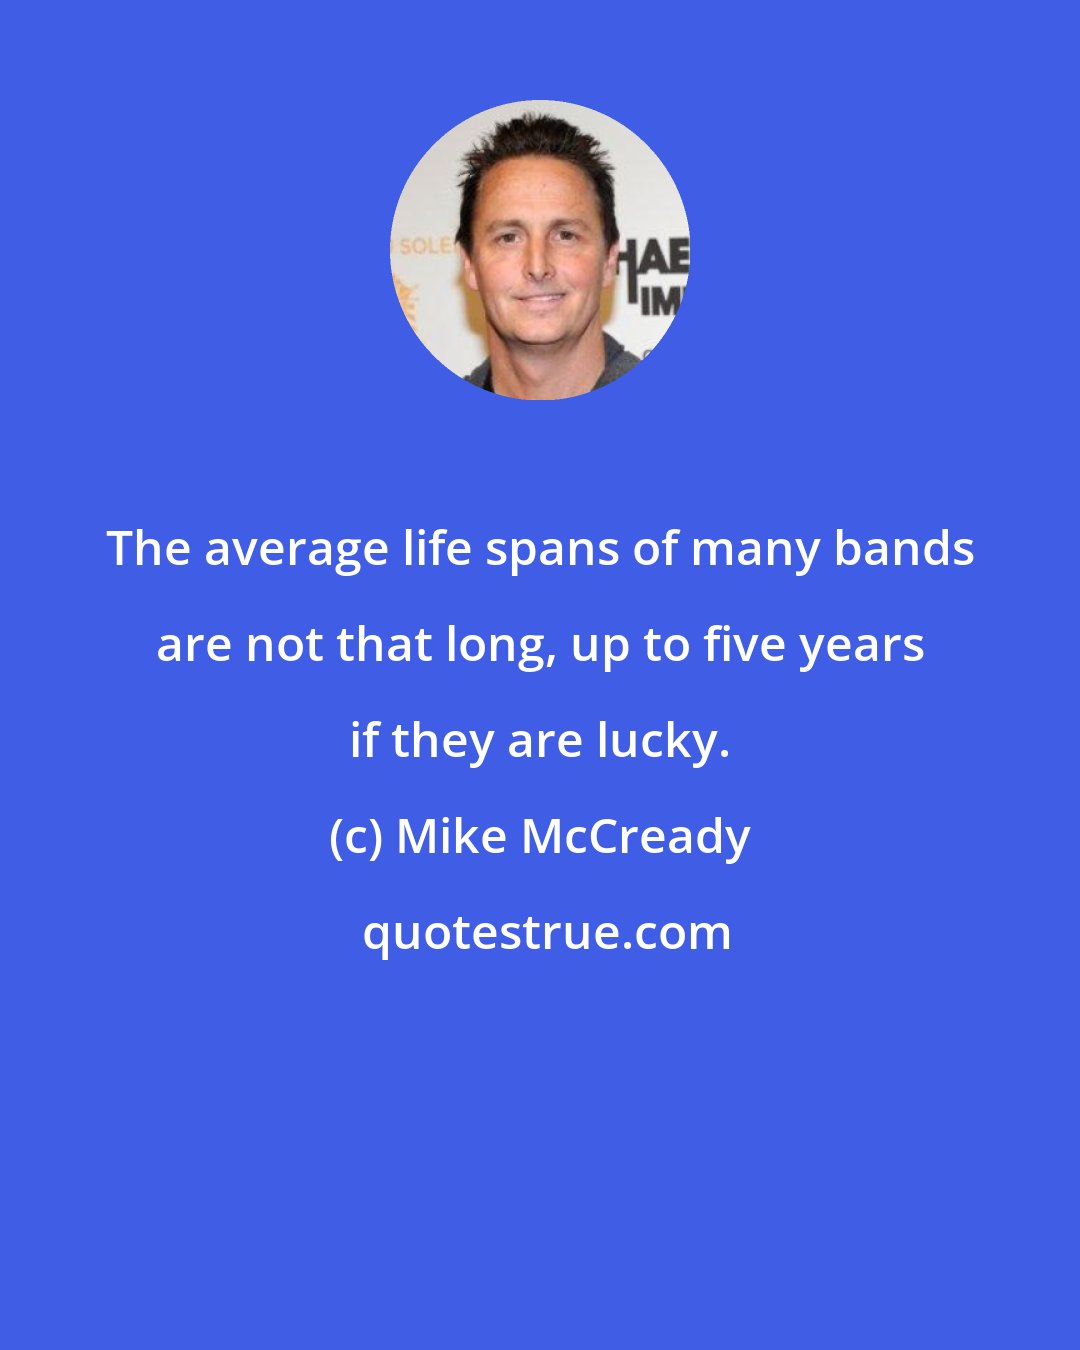 Mike McCready: The average life spans of many bands are not that long, up to five years if they are lucky.